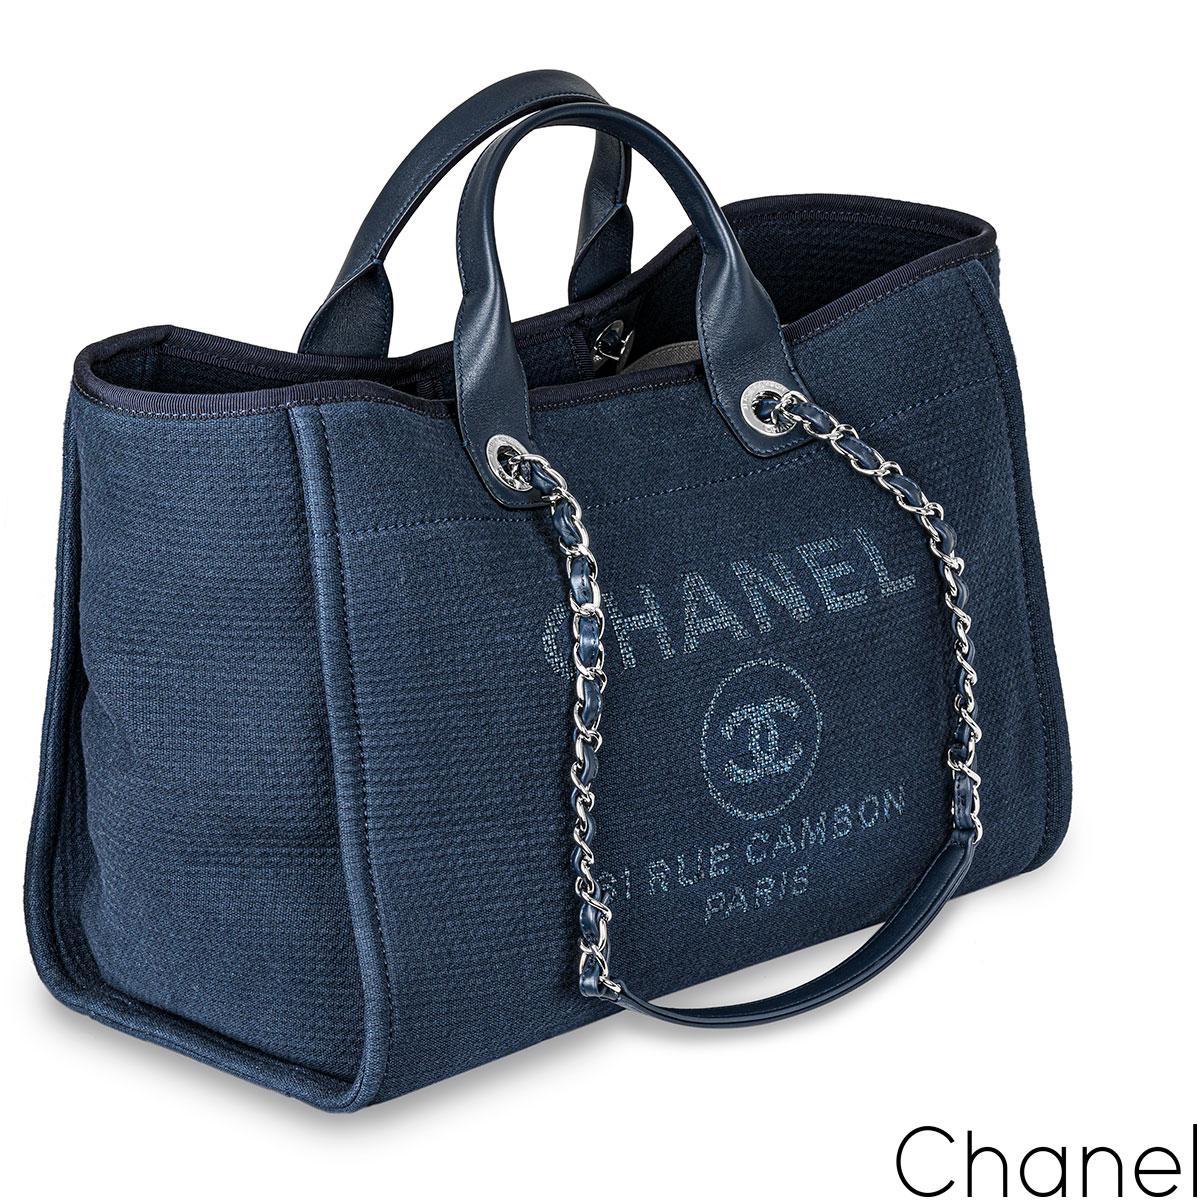 A chic Chanel blue Deauville Grand Shopping Tote bag. The exterior of this tote is crafted in blue canvas with silver-tone hardware. It features an interwoven chain link with blue leather shoulder straps and two leather top handles. The interior is